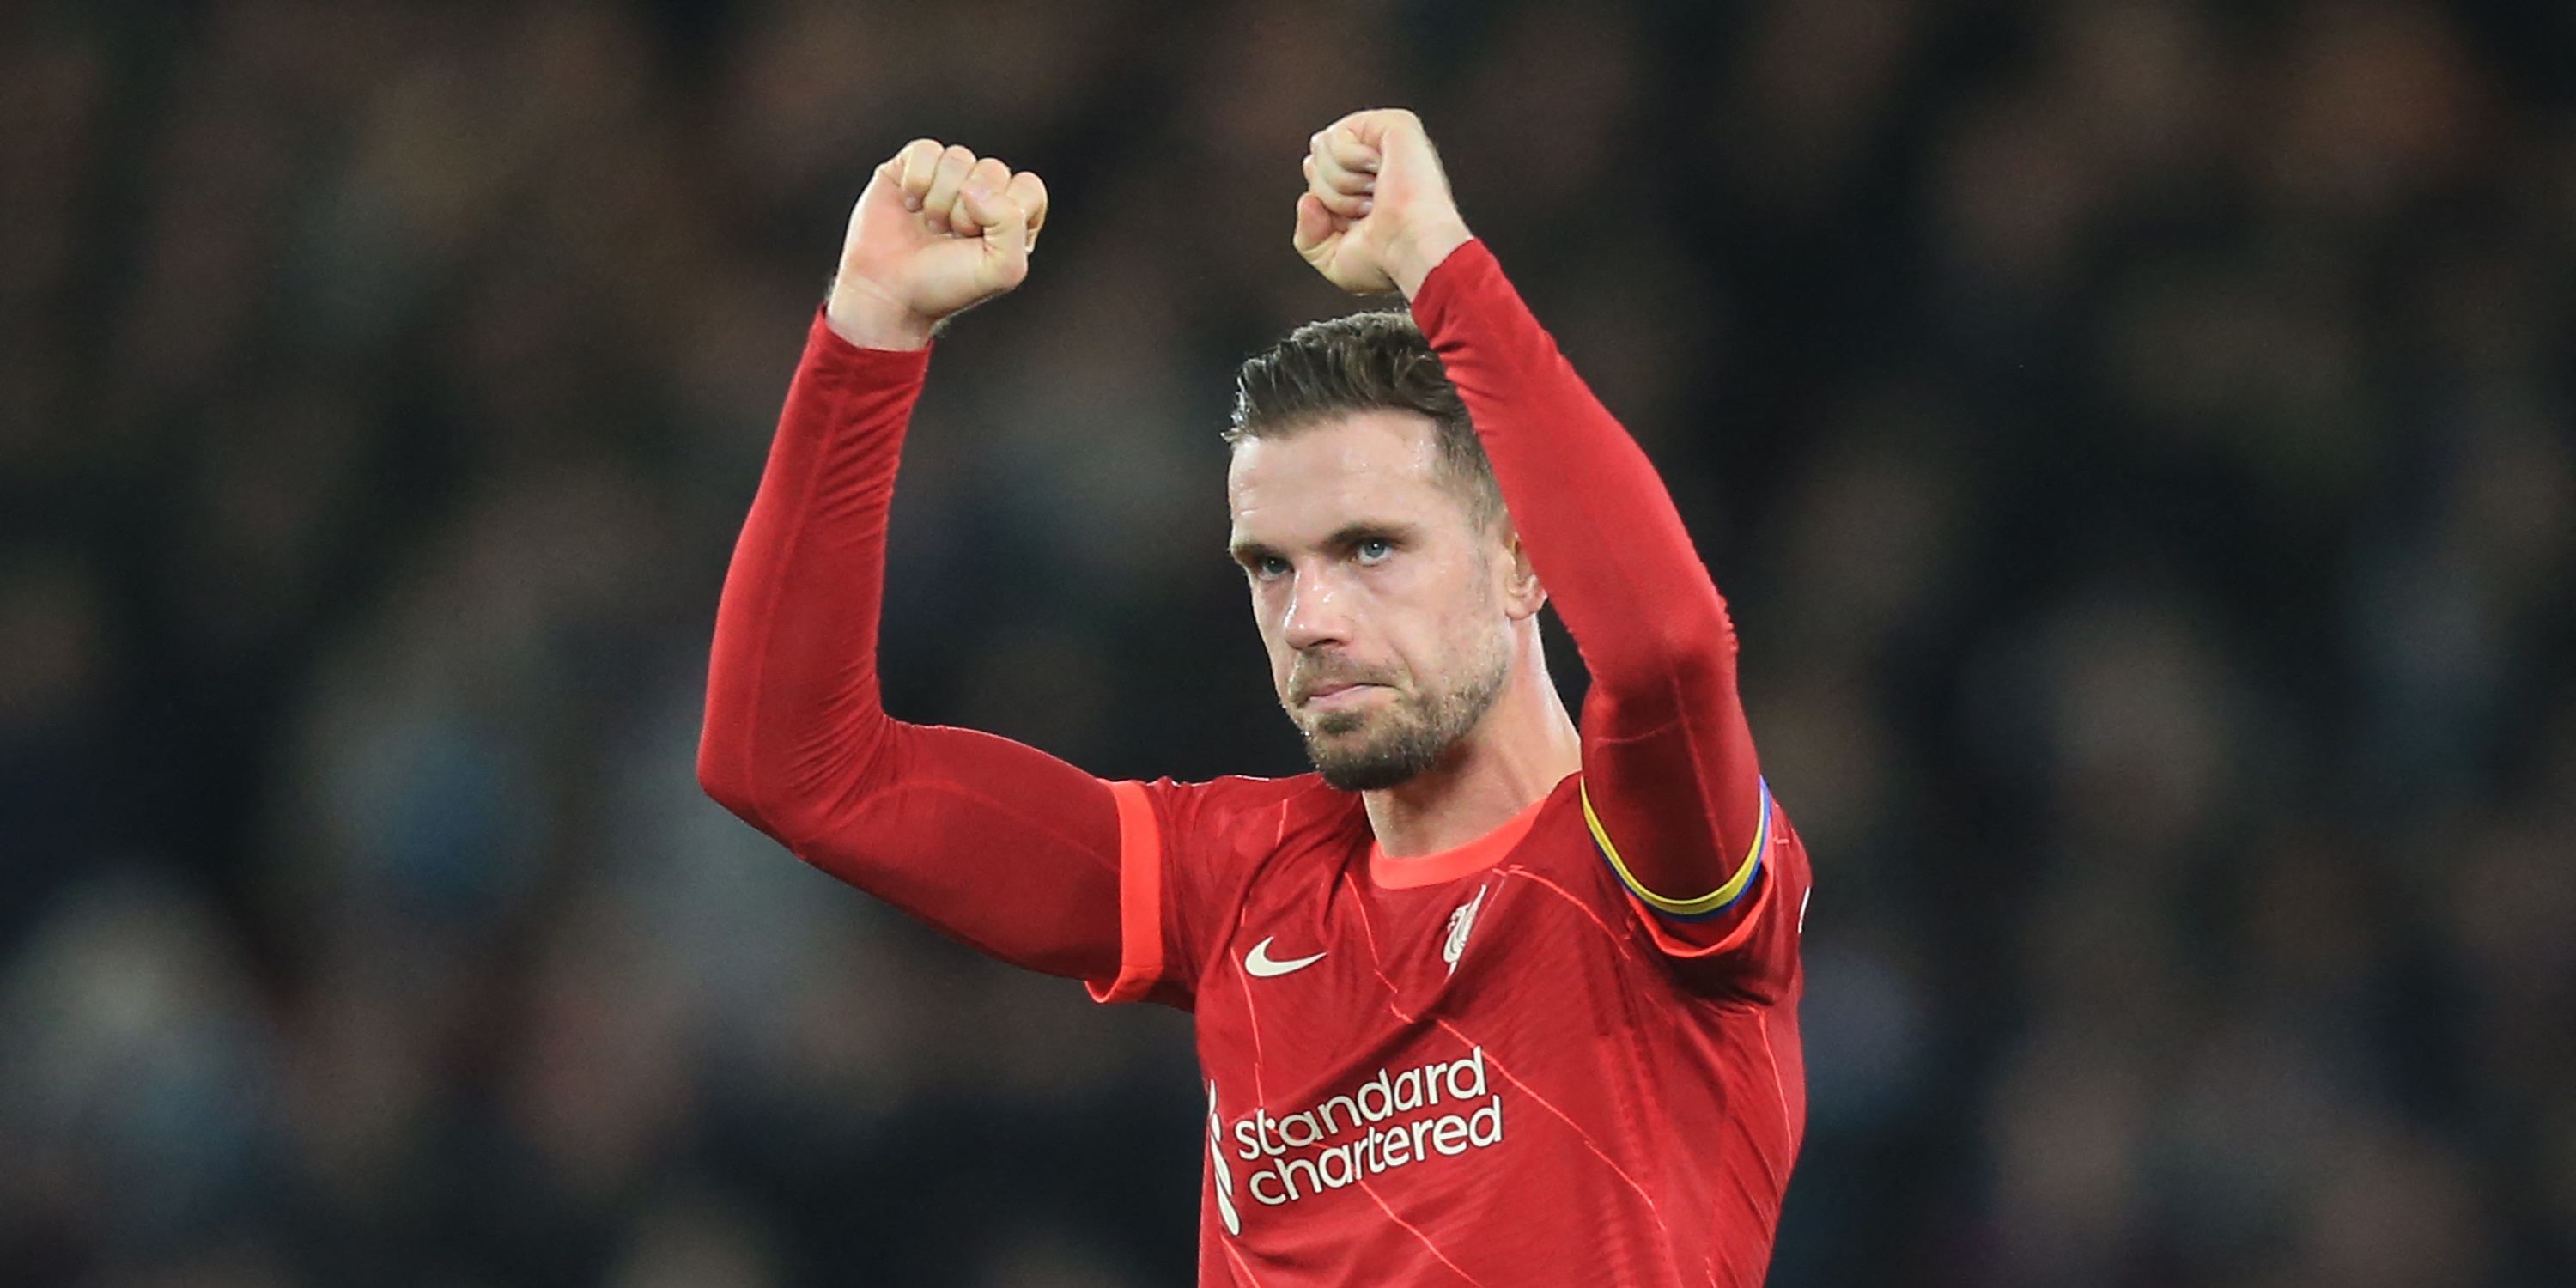 Danny Murphy reveals who he believes could replace Jordan Henderson at Liverpool and claims the 23-year-old would be a ‘phenomenal signing’